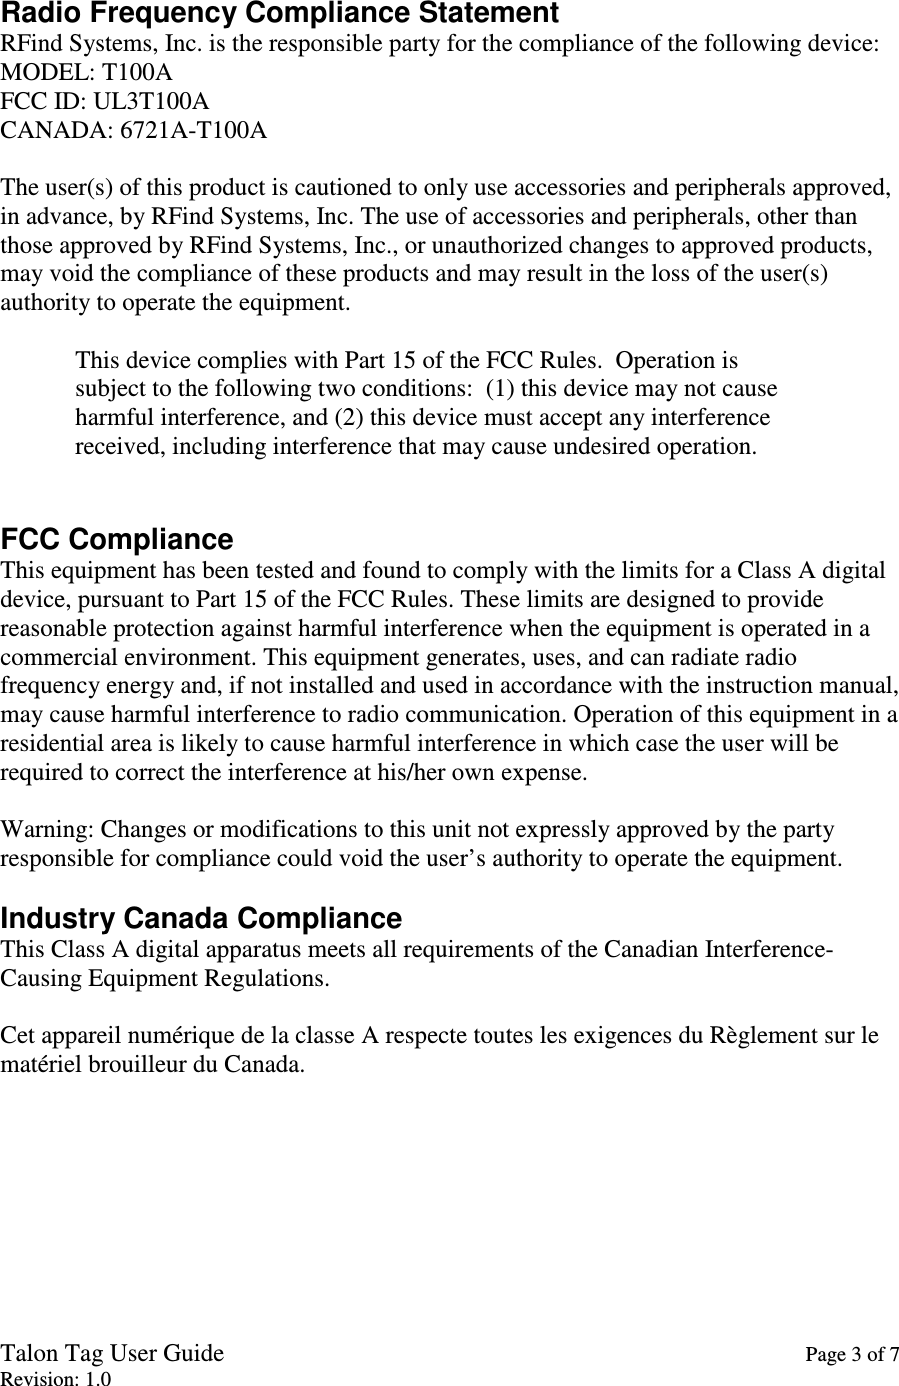 Talon Tag User Guide    Page 3 of 7 Revision: 1.0  Radio Frequency Compliance Statement RFind Systems, Inc. is the responsible party for the compliance of the following device: MODEL: T100A FCC ID: UL3T100A CANADA: 6721A-T100A  The user(s) of this product is cautioned to only use accessories and peripherals approved, in advance, by RFind Systems, Inc. The use of accessories and peripherals, other than those approved by RFind Systems, Inc., or unauthorized changes to approved products, may void the compliance of these products and may result in the loss of the user(s) authority to operate the equipment.  This device complies with Part 15 of the FCC Rules.  Operation is             subject to the following two conditions:  (1) this device may not cause             harmful interference, and (2) this device must accept any interference             received, including interference that may cause undesired operation.   FCC Compliance This equipment has been tested and found to comply with the limits for a Class A digital device, pursuant to Part 15 of the FCC Rules. These limits are designed to provide reasonable protection against harmful interference when the equipment is operated in a commercial environment. This equipment generates, uses, and can radiate radio frequency energy and, if not installed and used in accordance with the instruction manual, may cause harmful interference to radio communication. Operation of this equipment in a residential area is likely to cause harmful interference in which case the user will be required to correct the interference at his/her own expense.  Warning: Changes or modifications to this unit not expressly approved by the party responsible for compliance could void the user’s authority to operate the equipment.  Industry Canada Compliance This Class A digital apparatus meets all requirements of the Canadian Interference-Causing Equipment Regulations.  Cet appareil numérique de la classe A respecte toutes les exigences du Règlement sur le matériel brouilleur du Canada. 